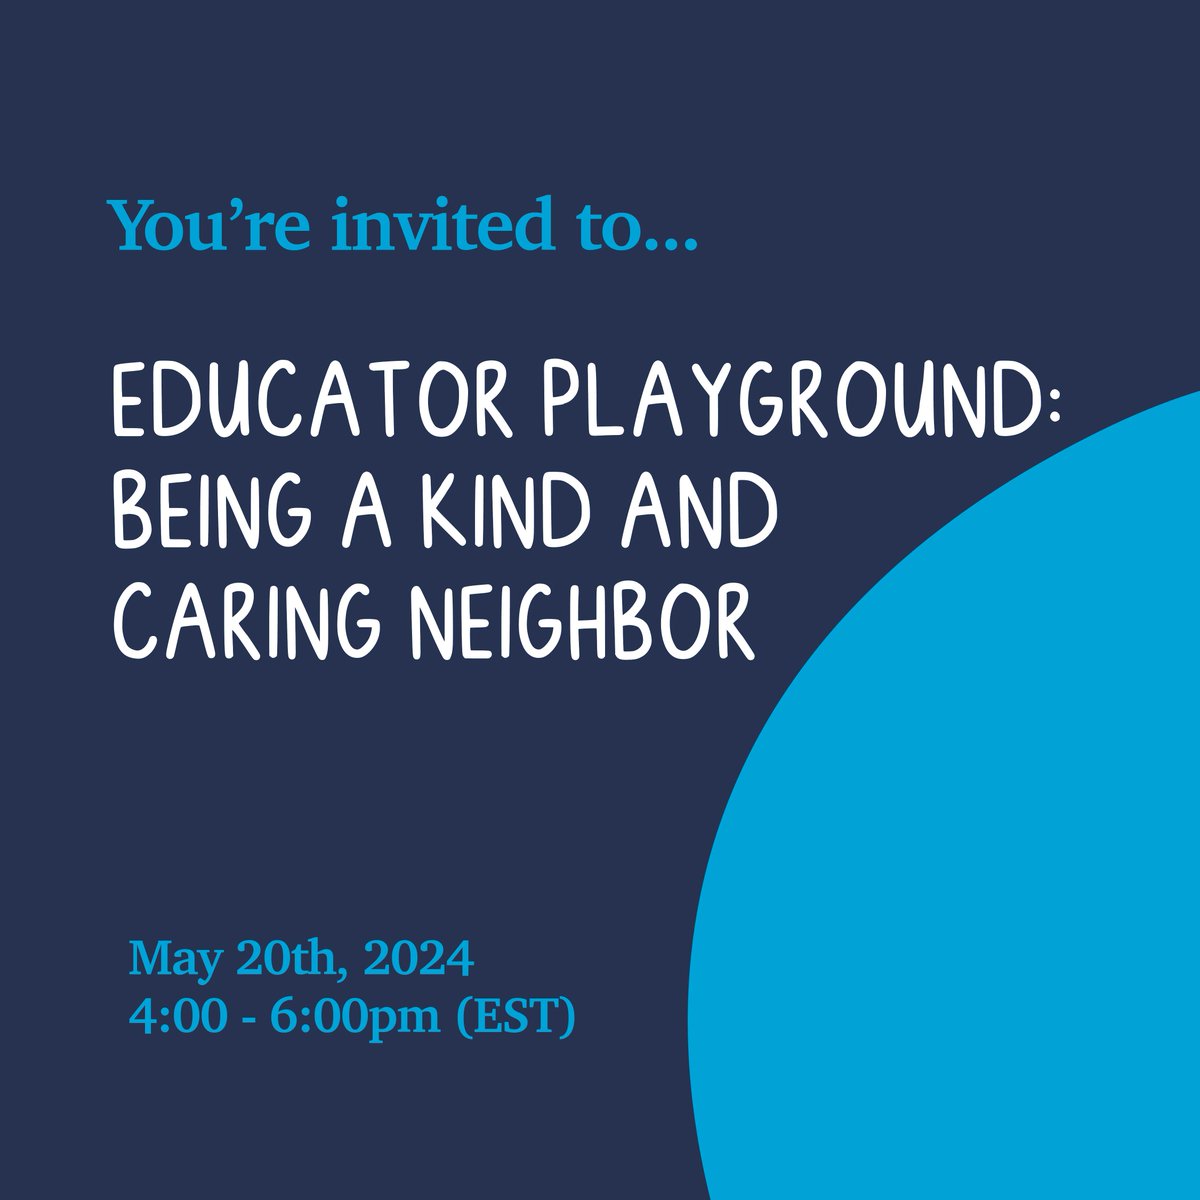 Step into the world of kindness and care with Educator Playground: Being a Kind and Caring Neighbor! Save the date: Monday, May 20th, 4:00 pm - 6:00 pm (EST) at Latrobe Art Center. See you there! #FredRogersLegacy #KindnessMatters #CommunityEvent'

docs.google.com/forms/d/e/1FAI…